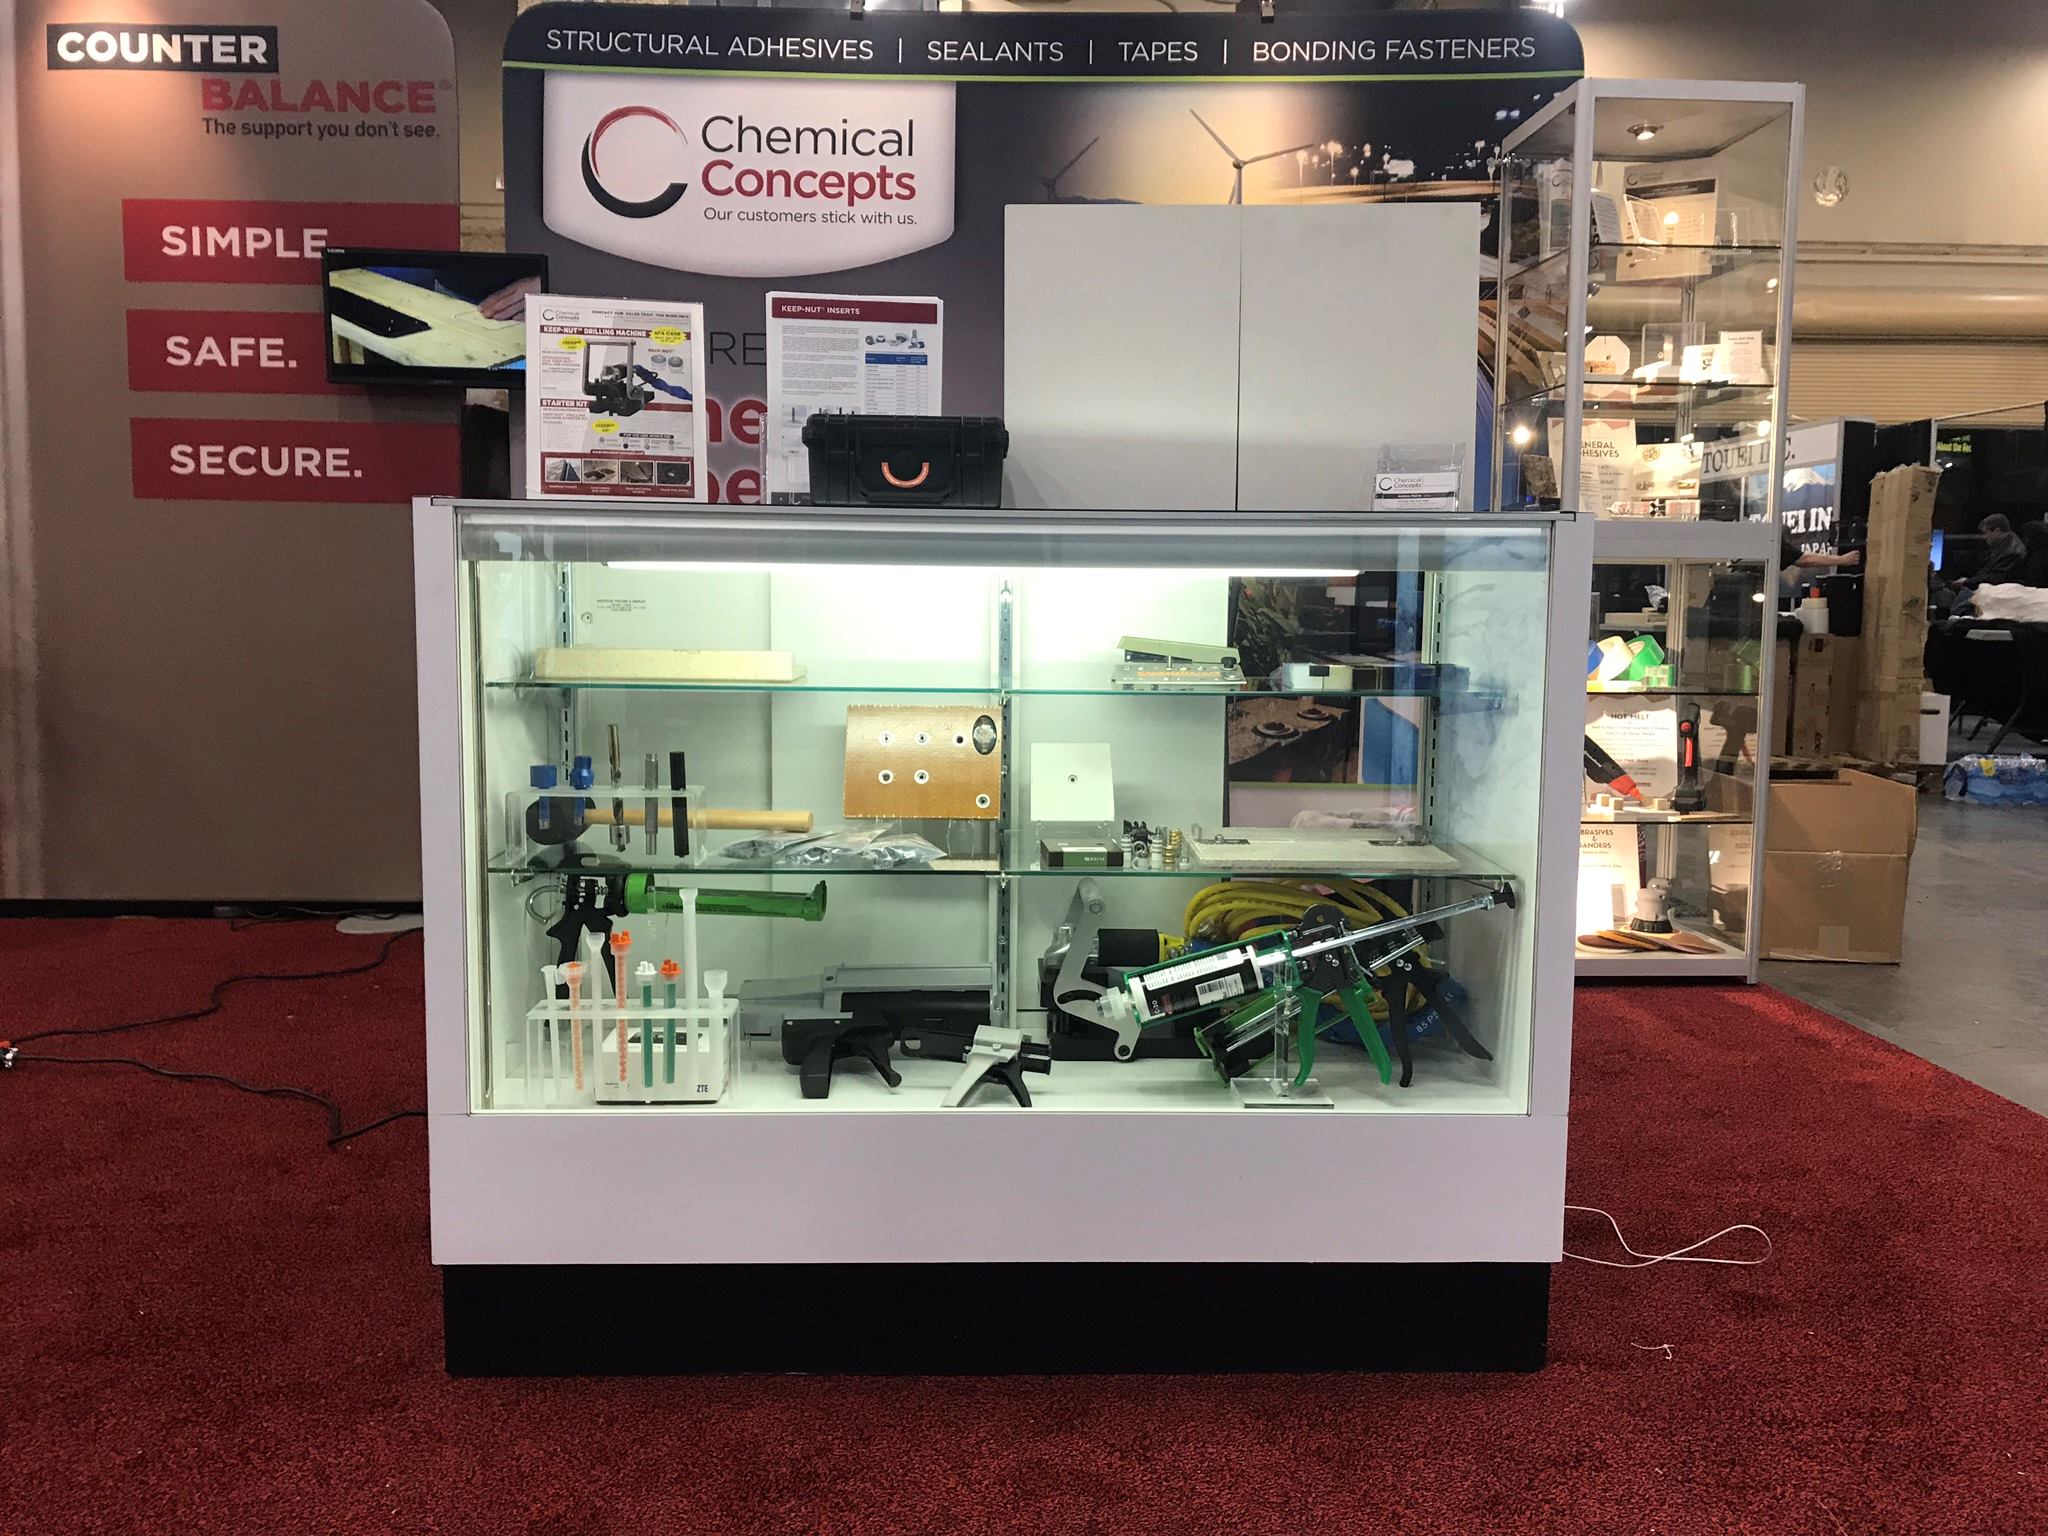 Chemical Concepts booth at TISE 2019